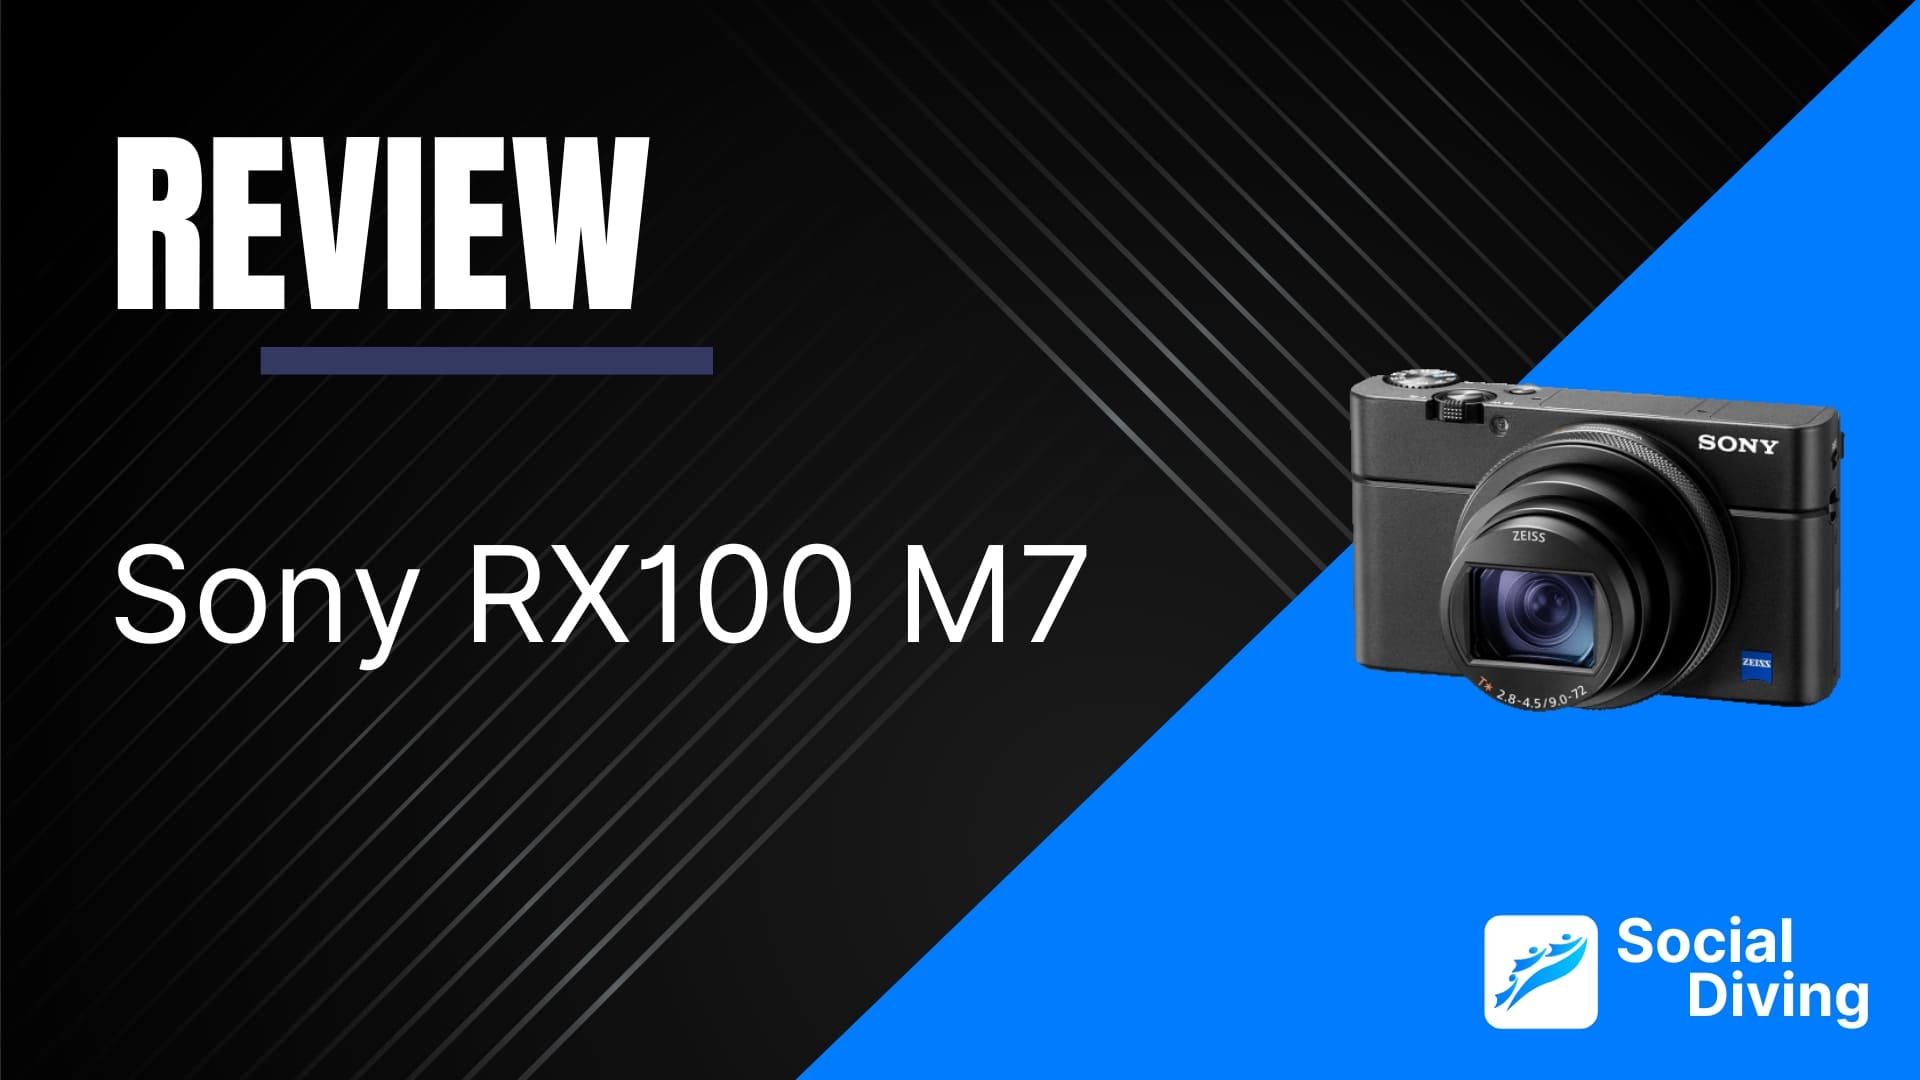 Sony RX100 M7 review